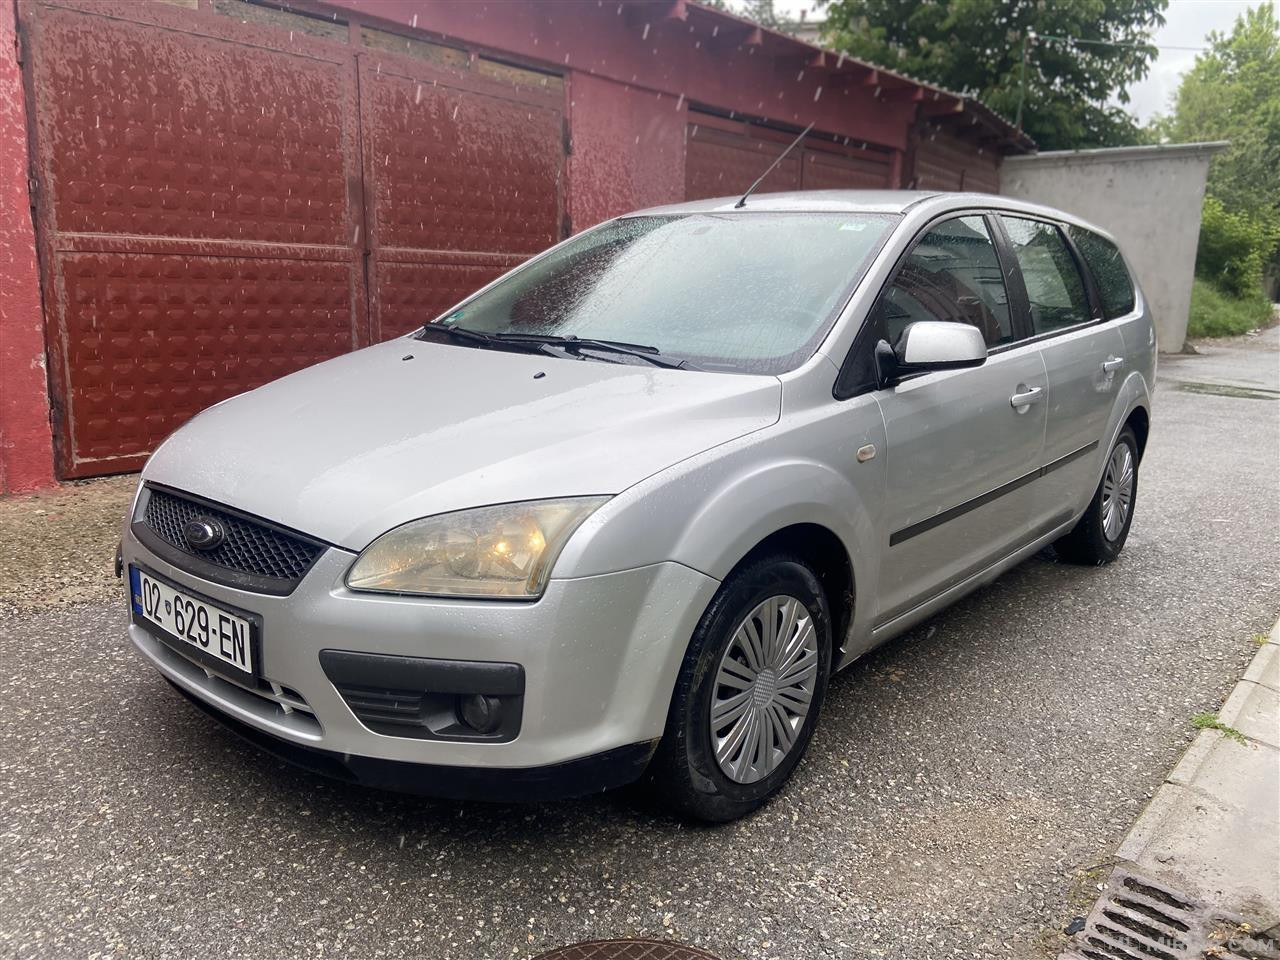 Ford Focus 1.6 tdci 80 KW 109 PS